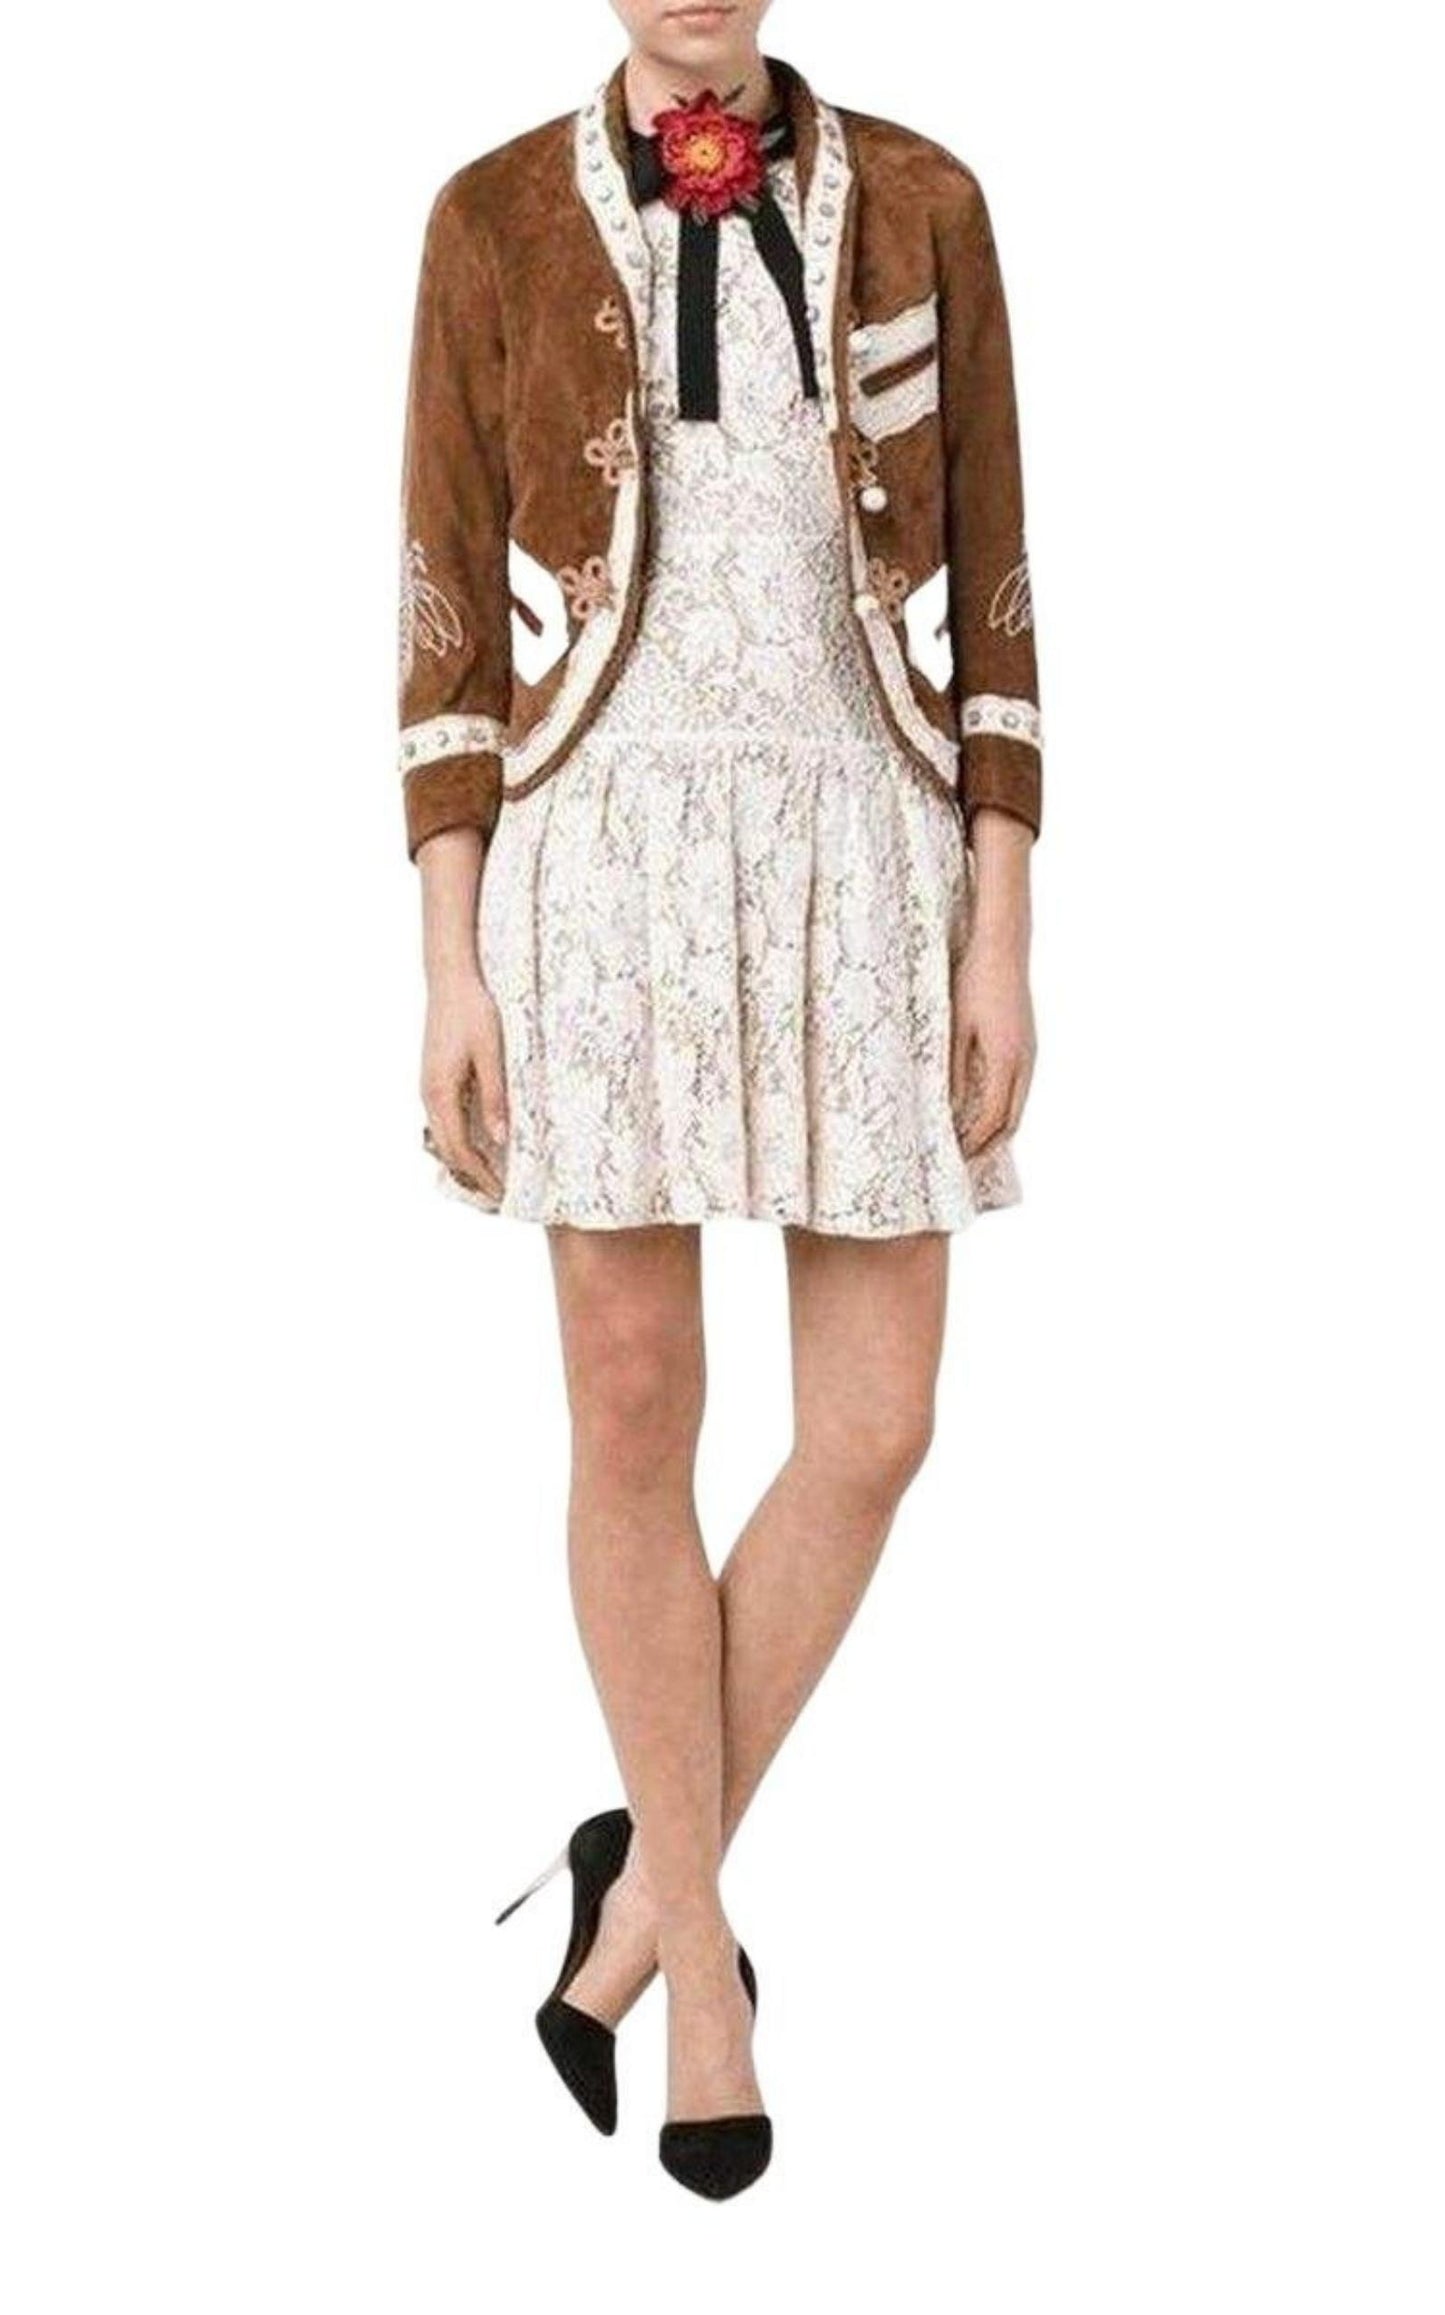  GucciBrown Suede Embroidered Jacket - Runway Catalog